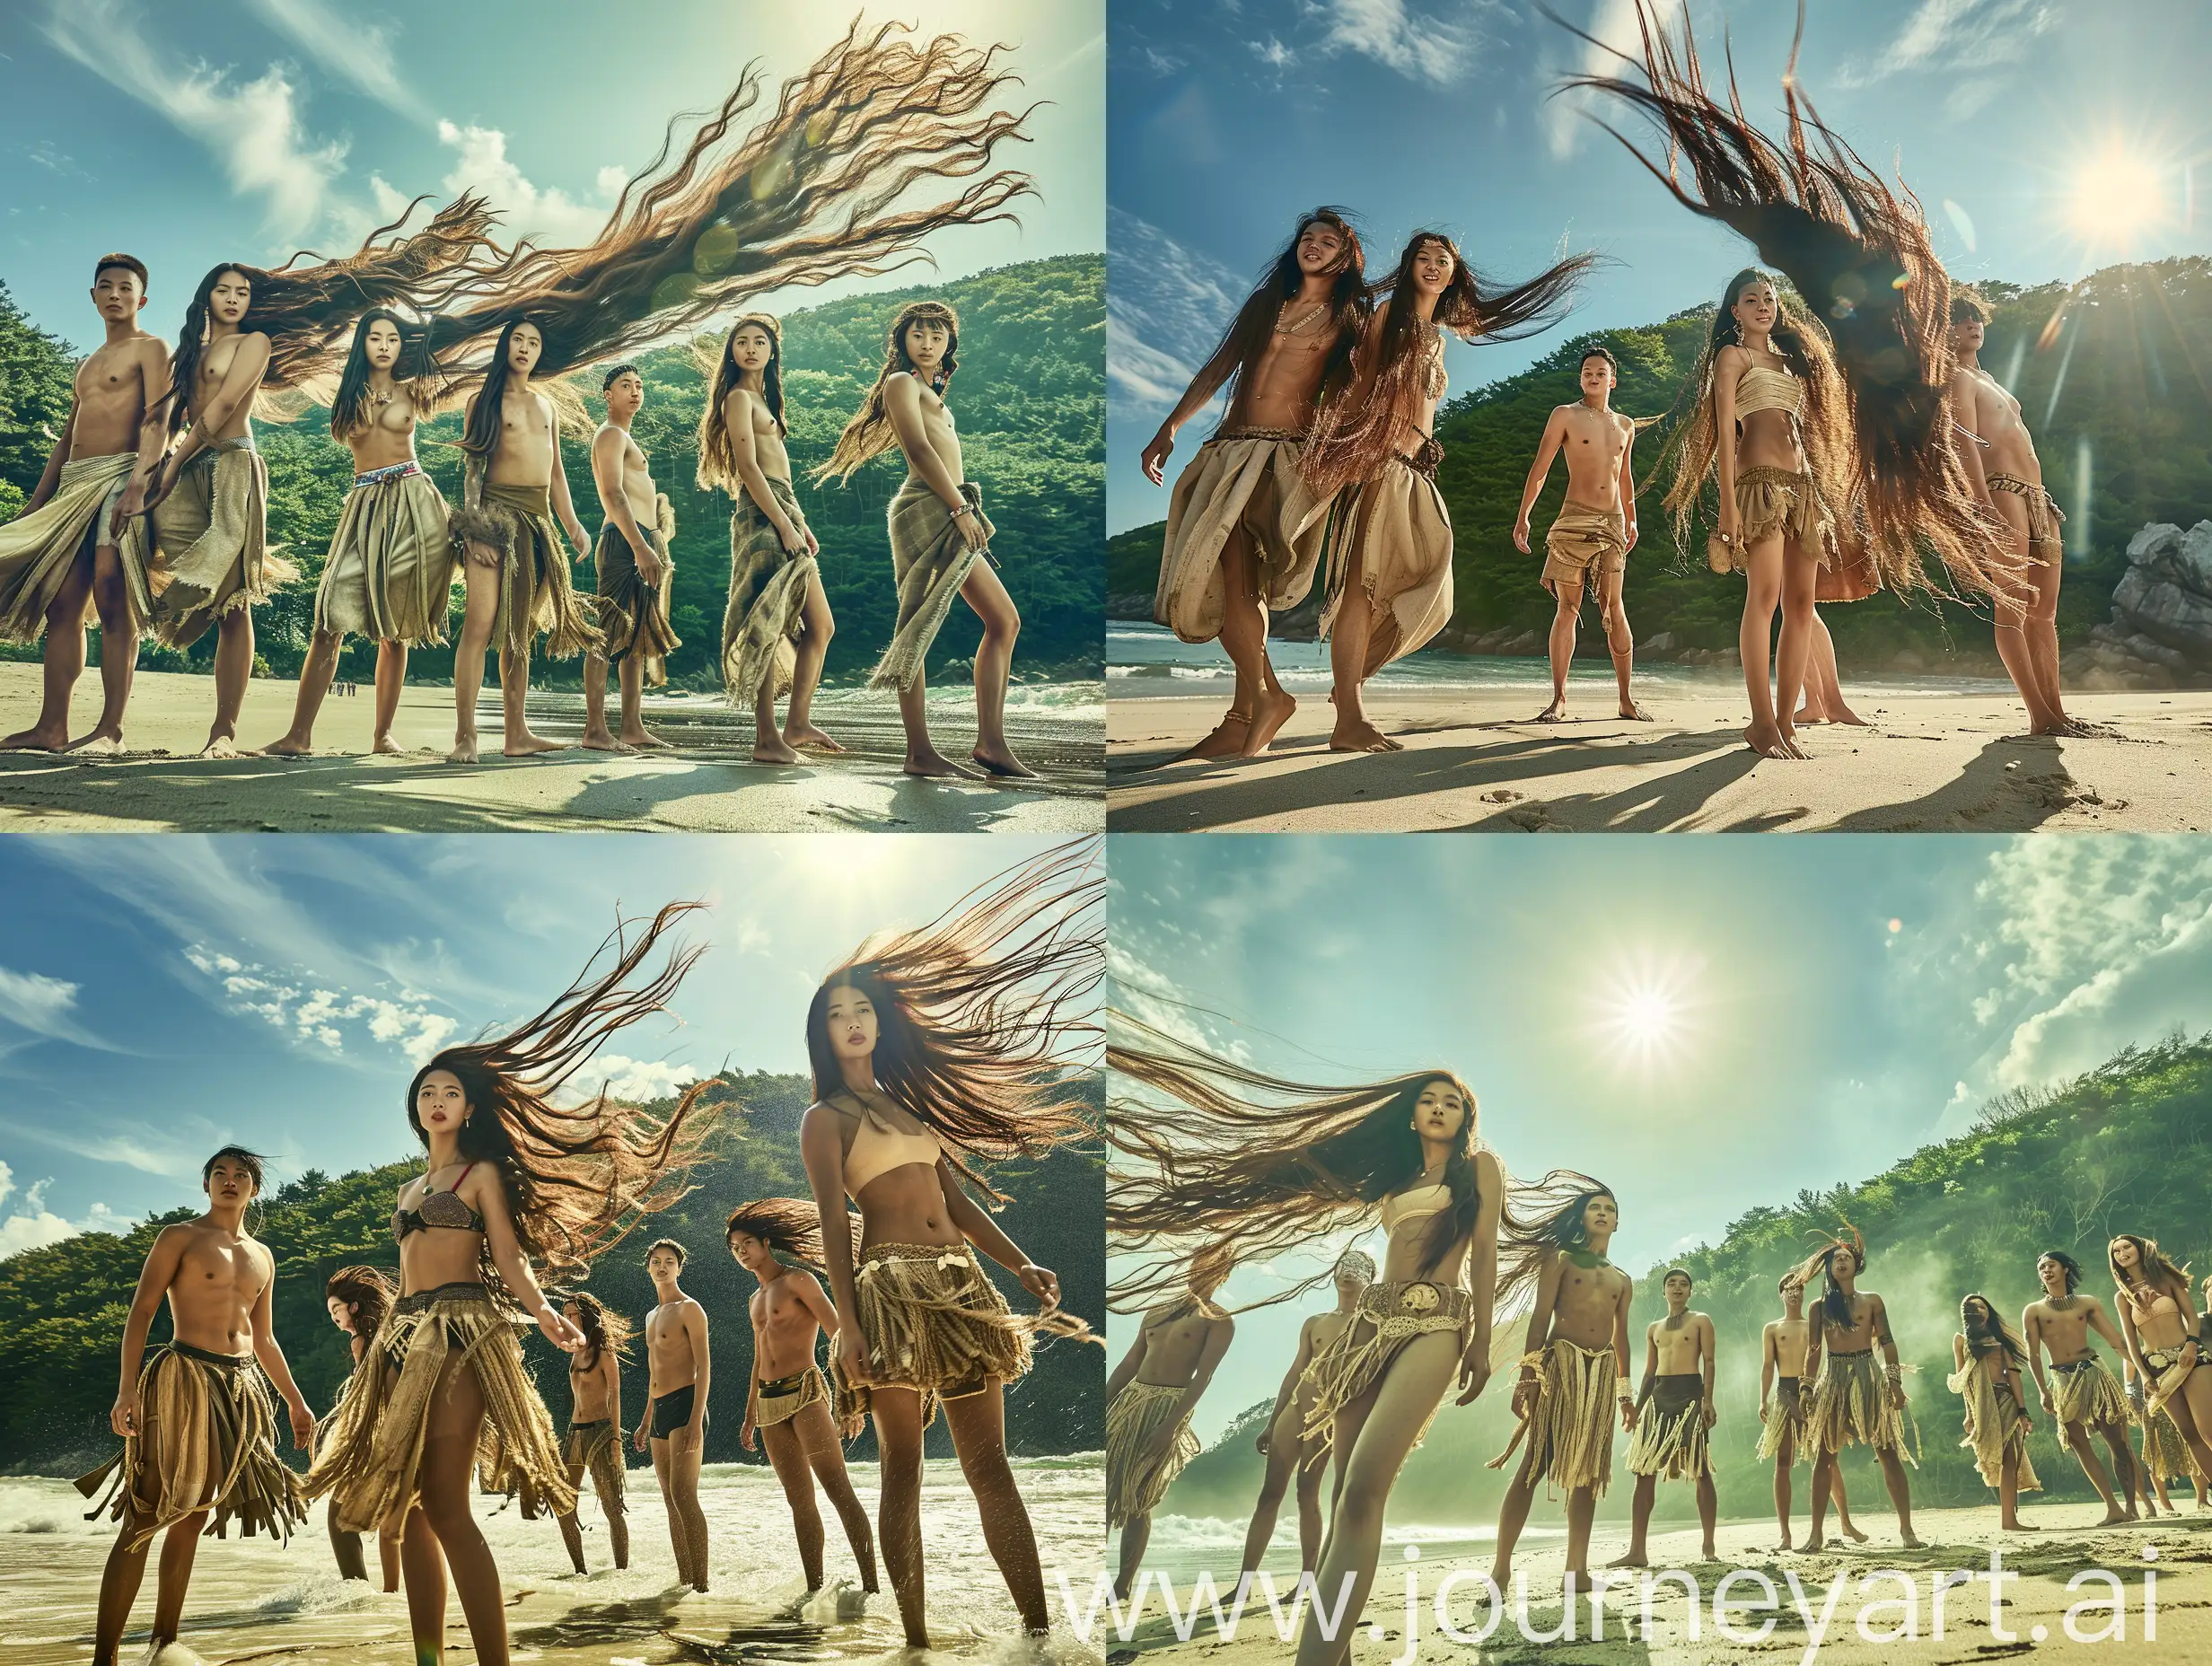 Image of tribal Korean men and tribal Korean women posing for a hair advertisement photoshoot. Standing with model like attitude and facing the camera on an island with their long silky shiny hair flying with the wind. Sun light bouncing on their hair. They are standing on the beach and behind them is a green forest that looks magical. It is a bright sunshine day with blue sky and some light clouds visible dramatically. Women are wearing authentic tribal clothes like tattered skirts and tube tops, very stylish Men are wearing just a cloth to cover their bottom with the upper body bare. Dramatic low angle shot with depth visible behind the people.